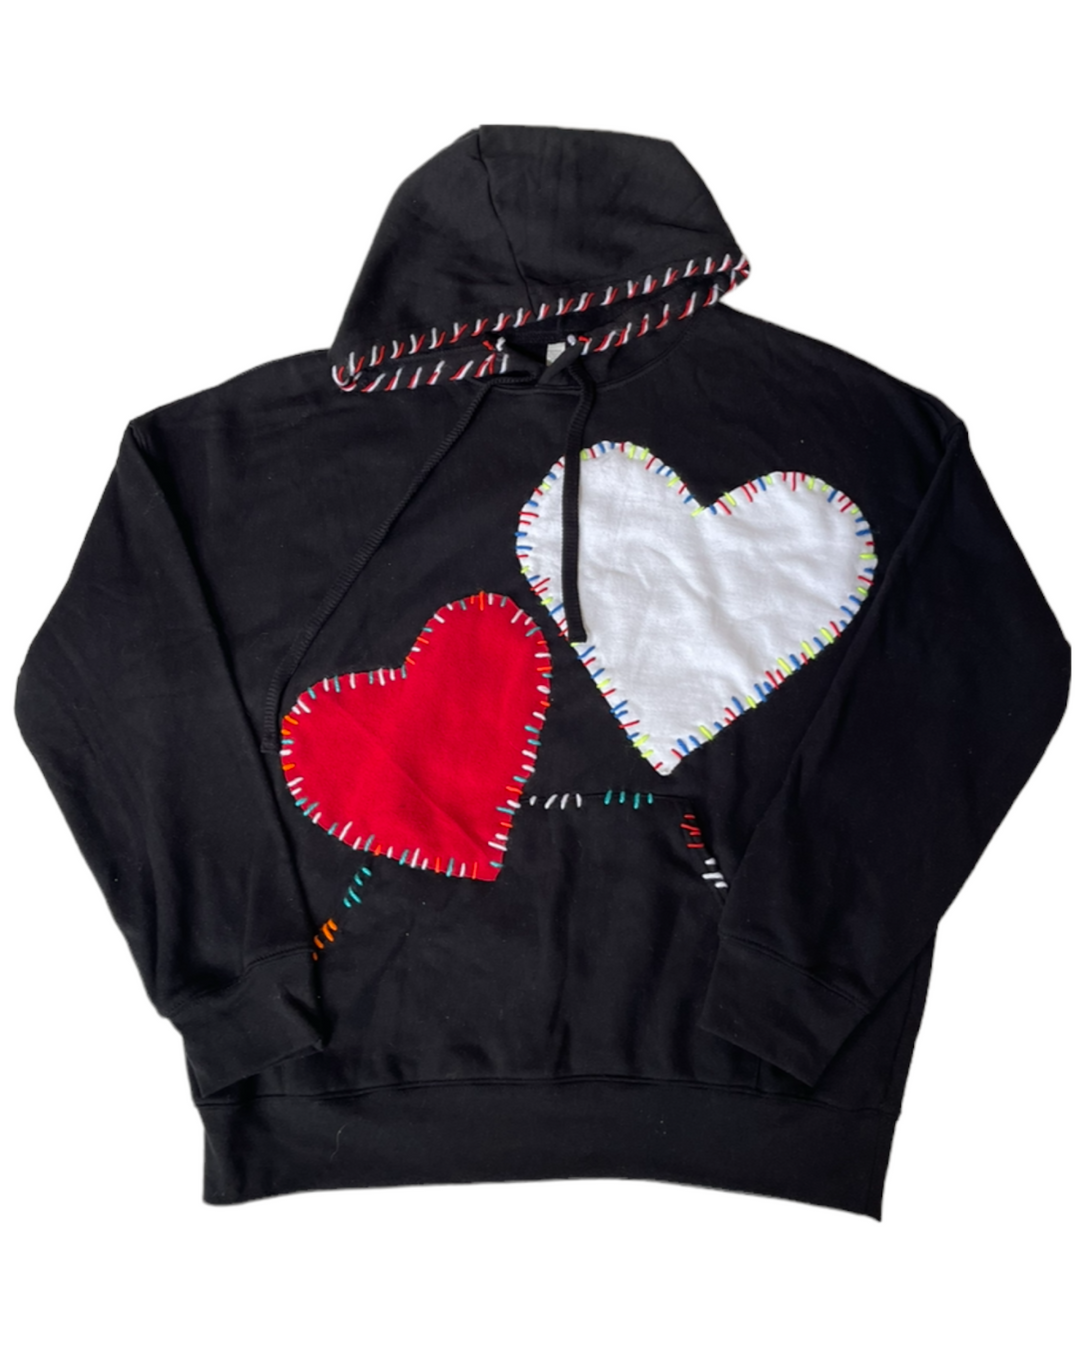 Embroidery Heart Patched Sweatshirt